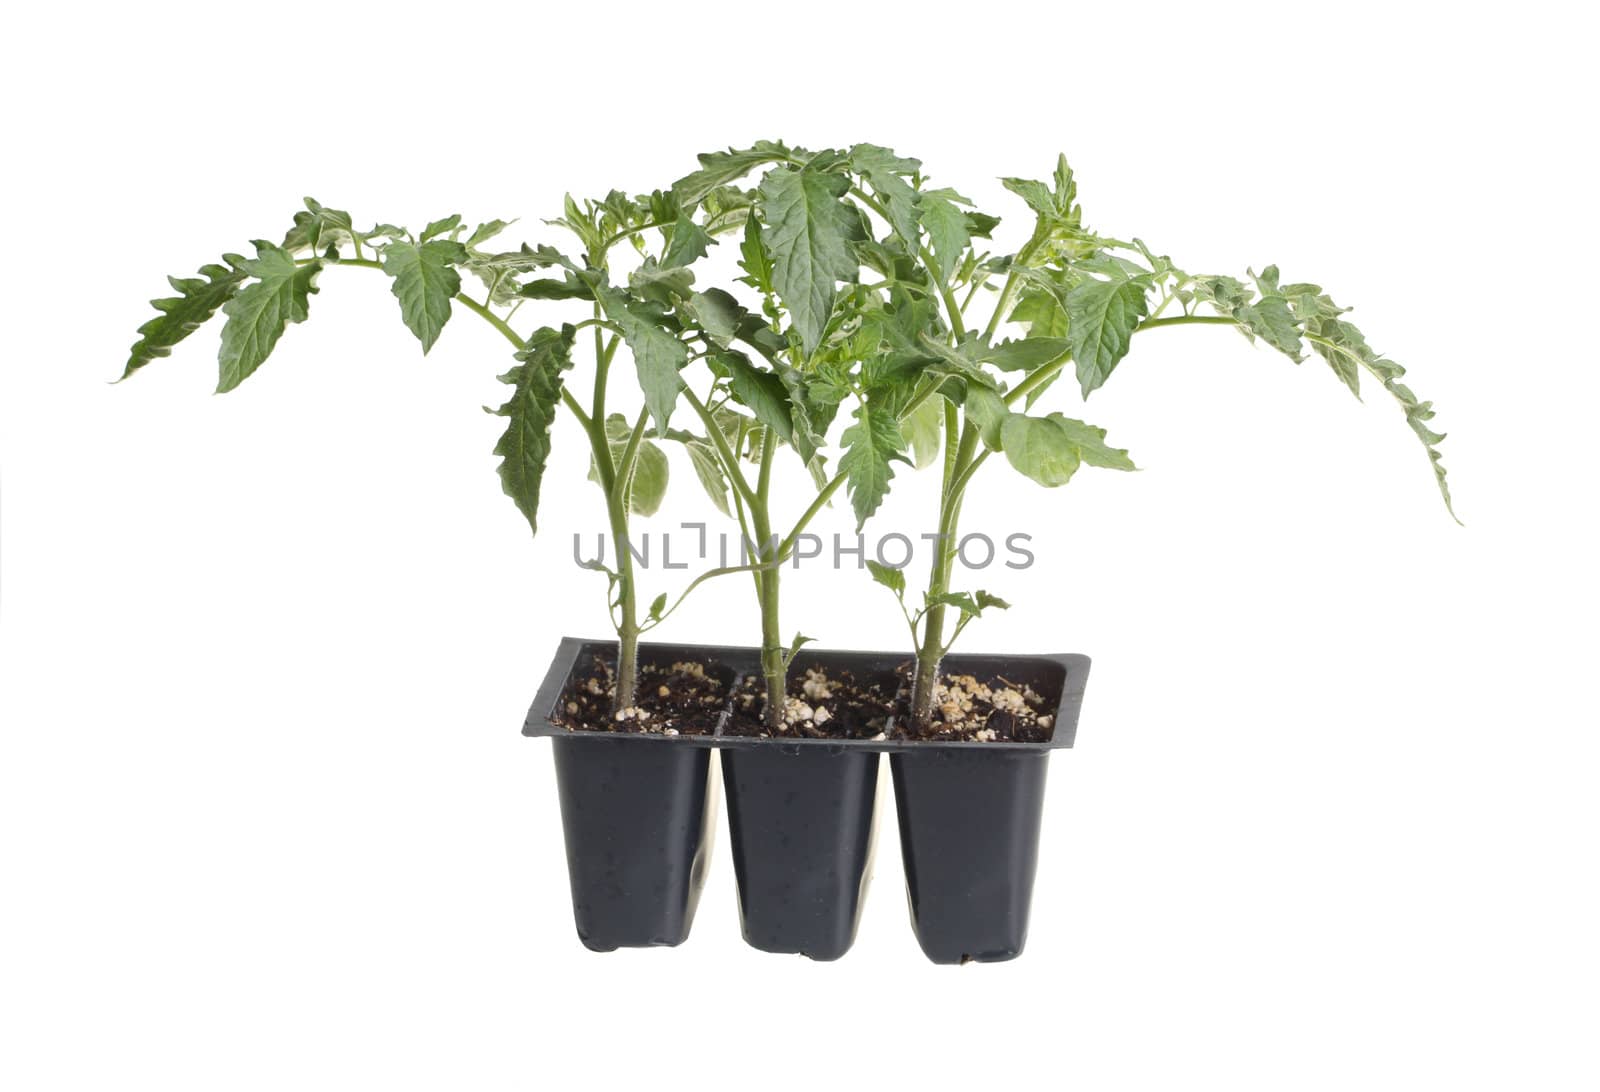 Plastic pack containing three seedlings of tomato (Solanum lycopersicum or Lycopersicon esculentum) ready for transplanting into a home garden isolated against a white background